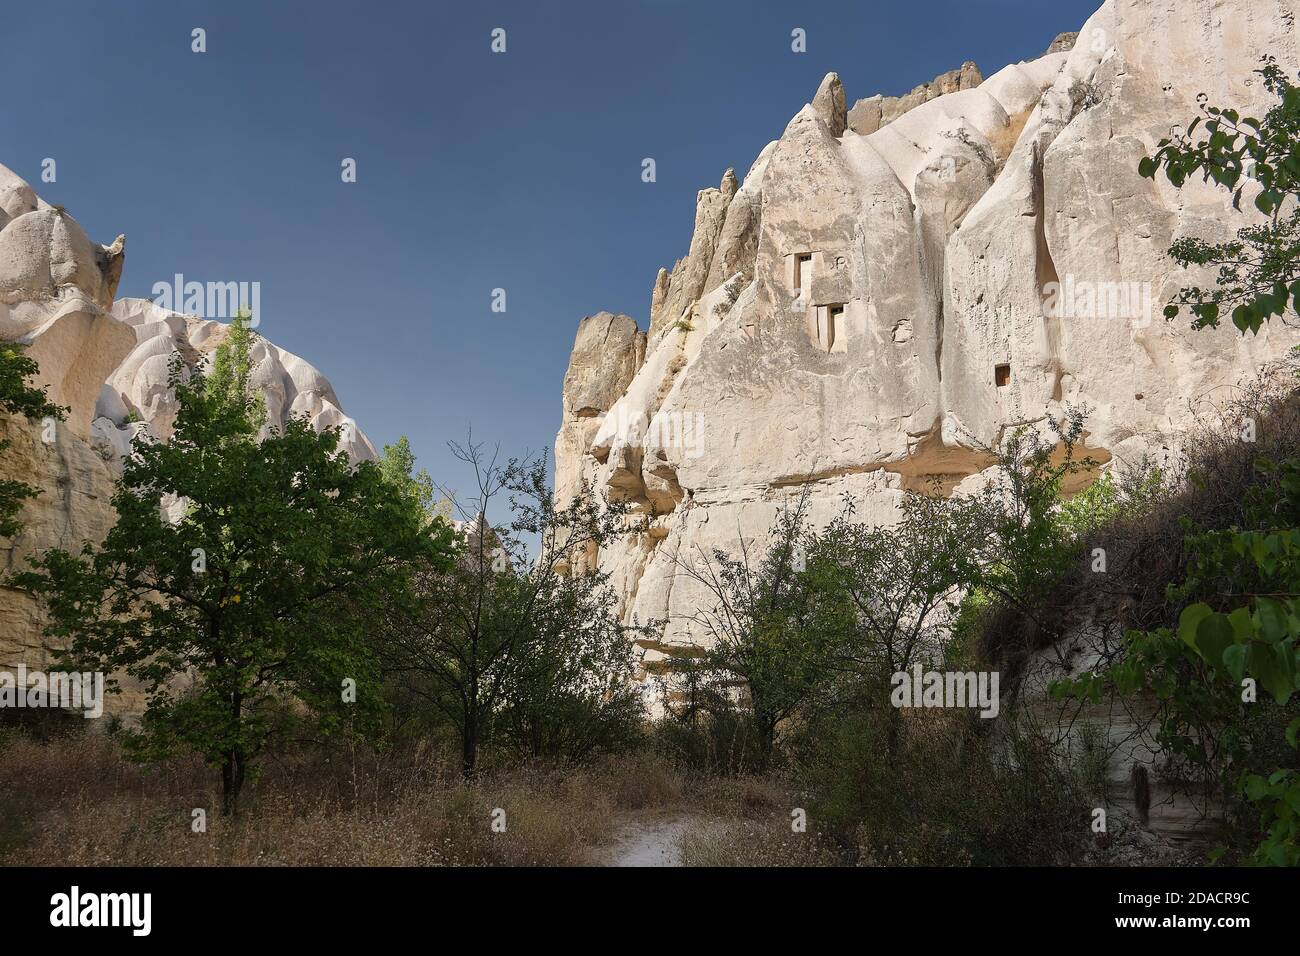 Cappadocia walking trail view of the ruins of fairy chimney shelters built in the rock, Cappadocia, Turkey Stock Photo